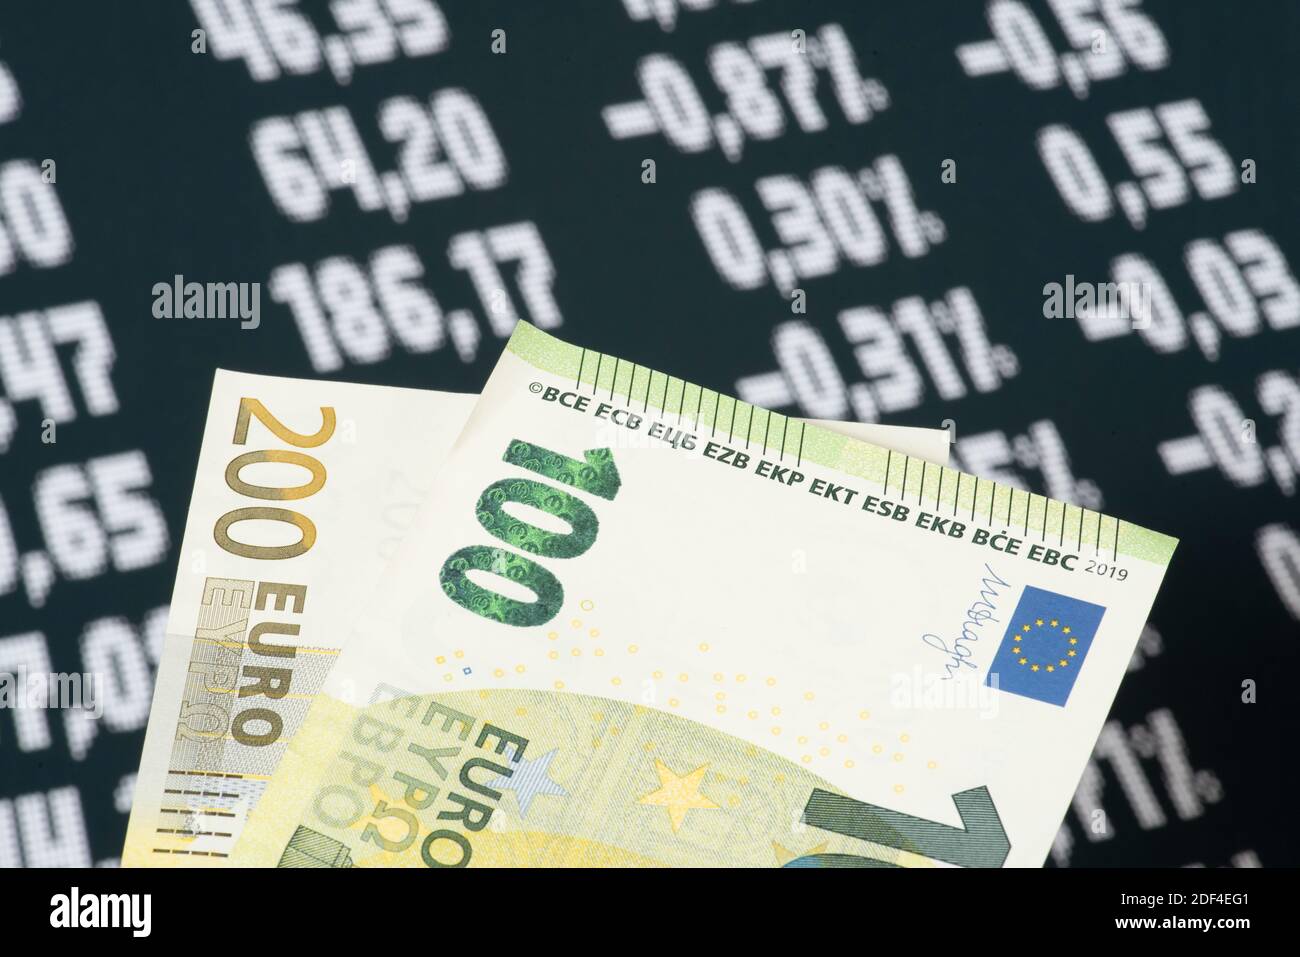 Euro banknotes and price board on the stock exchange Stock Photo